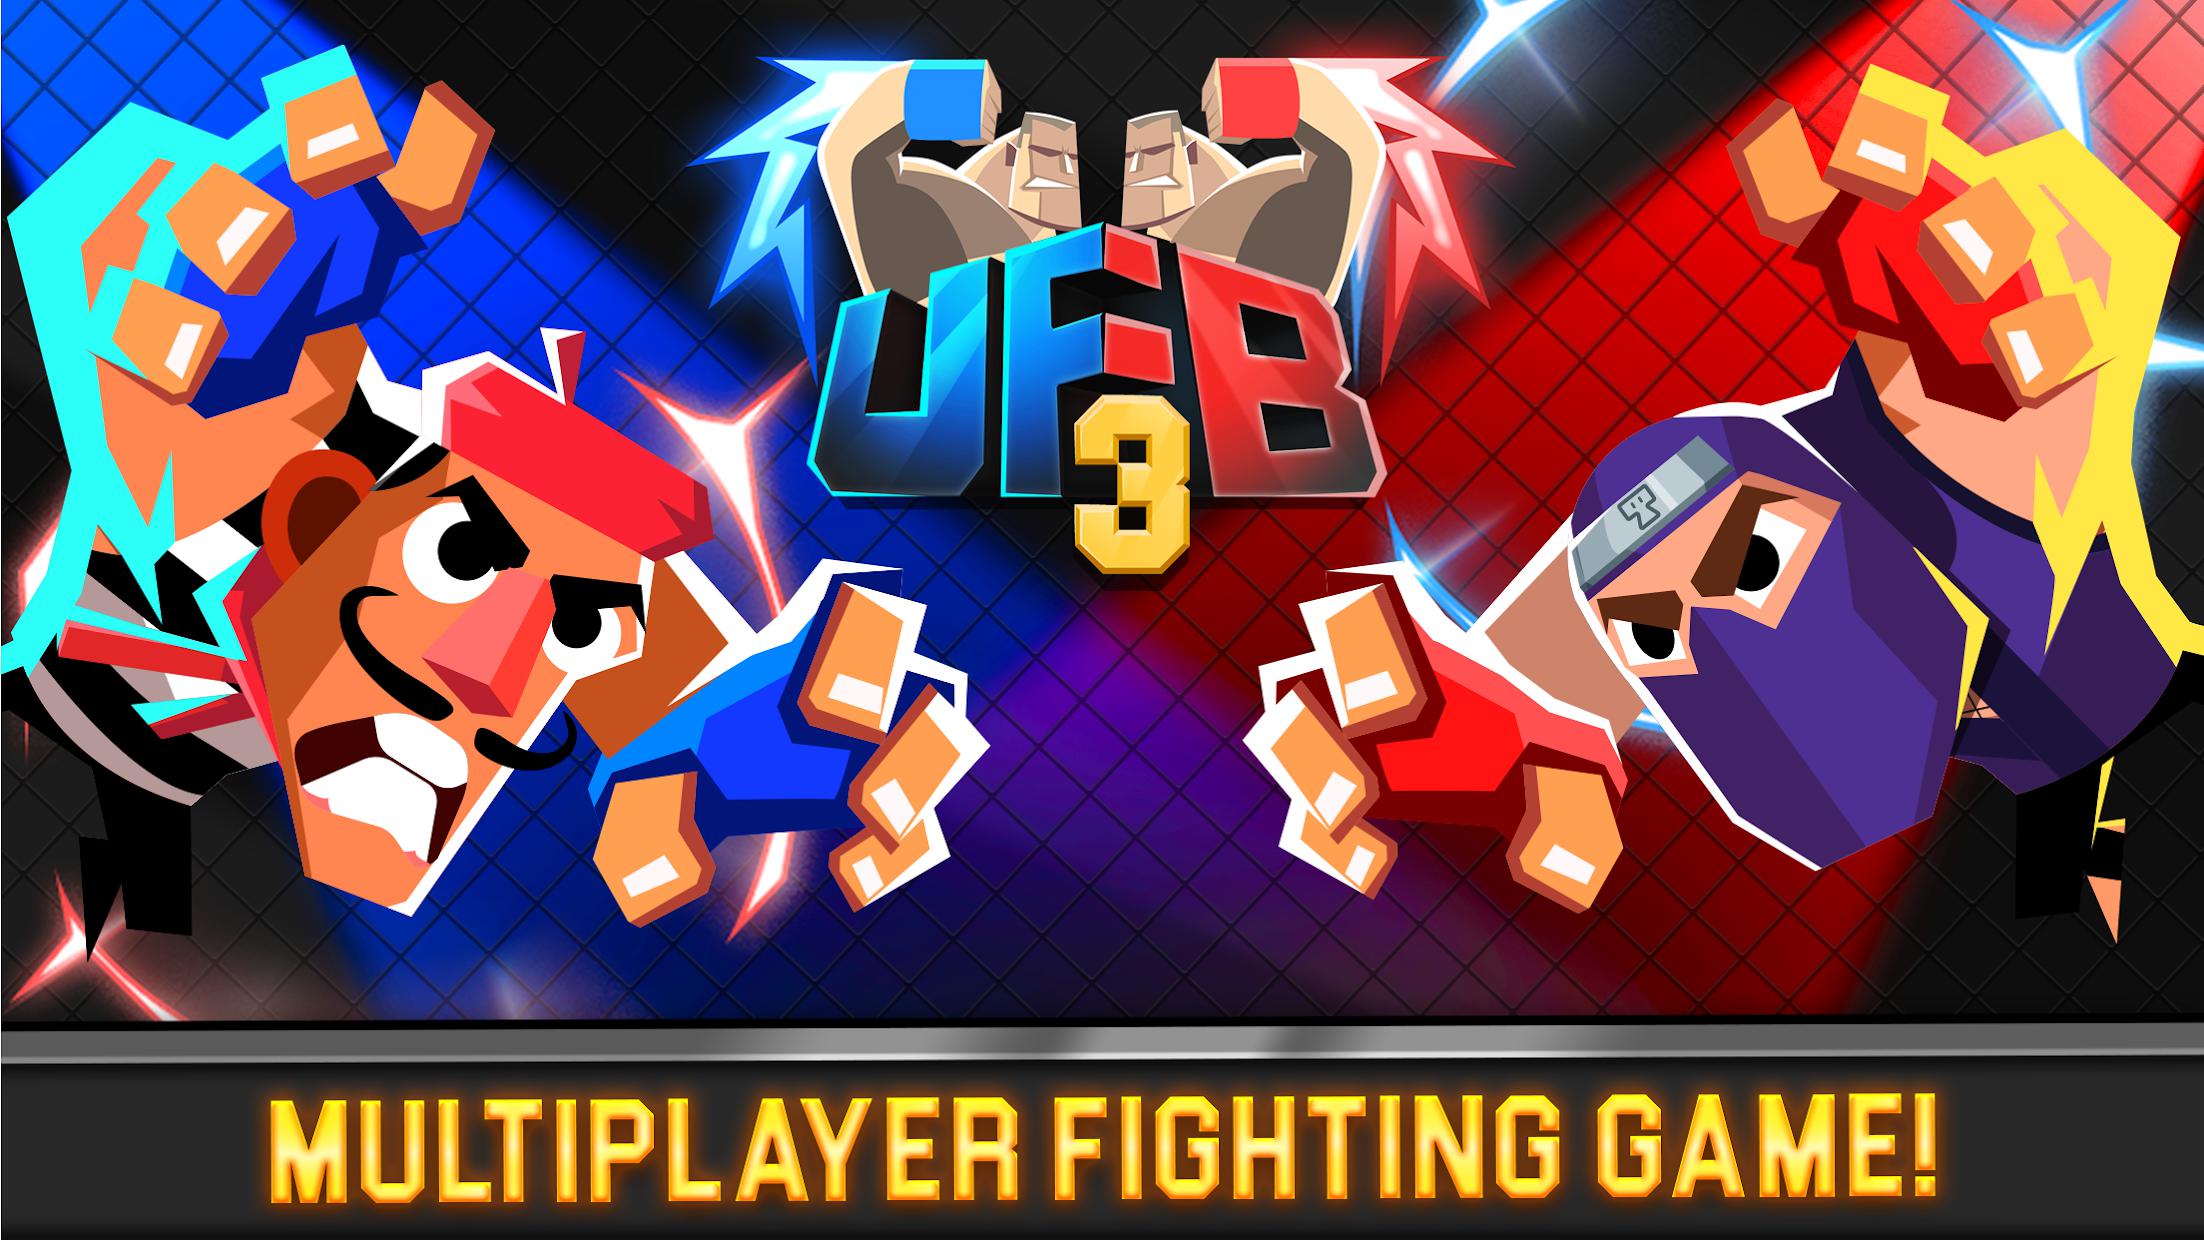 UFB 3: Ultra Fighting Bros - 2 Player Fight Game